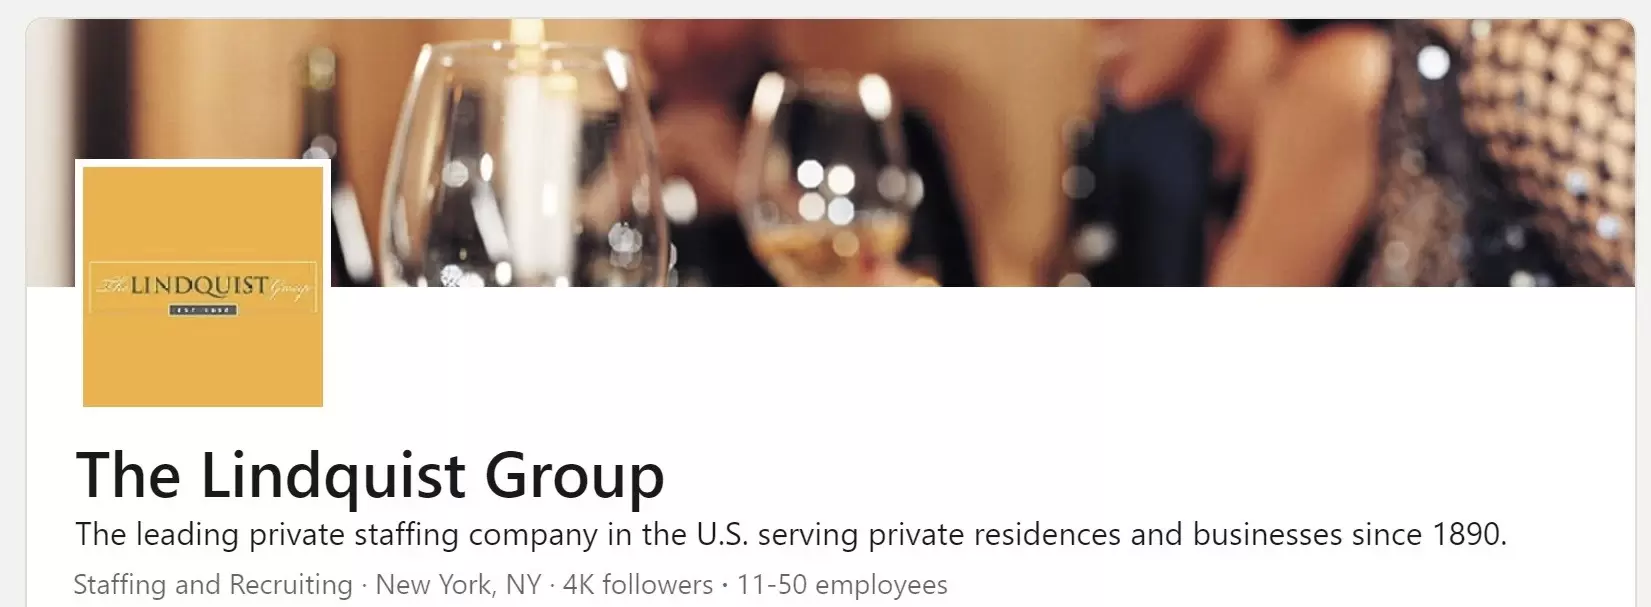 The Lindquist Group on LinkedIn